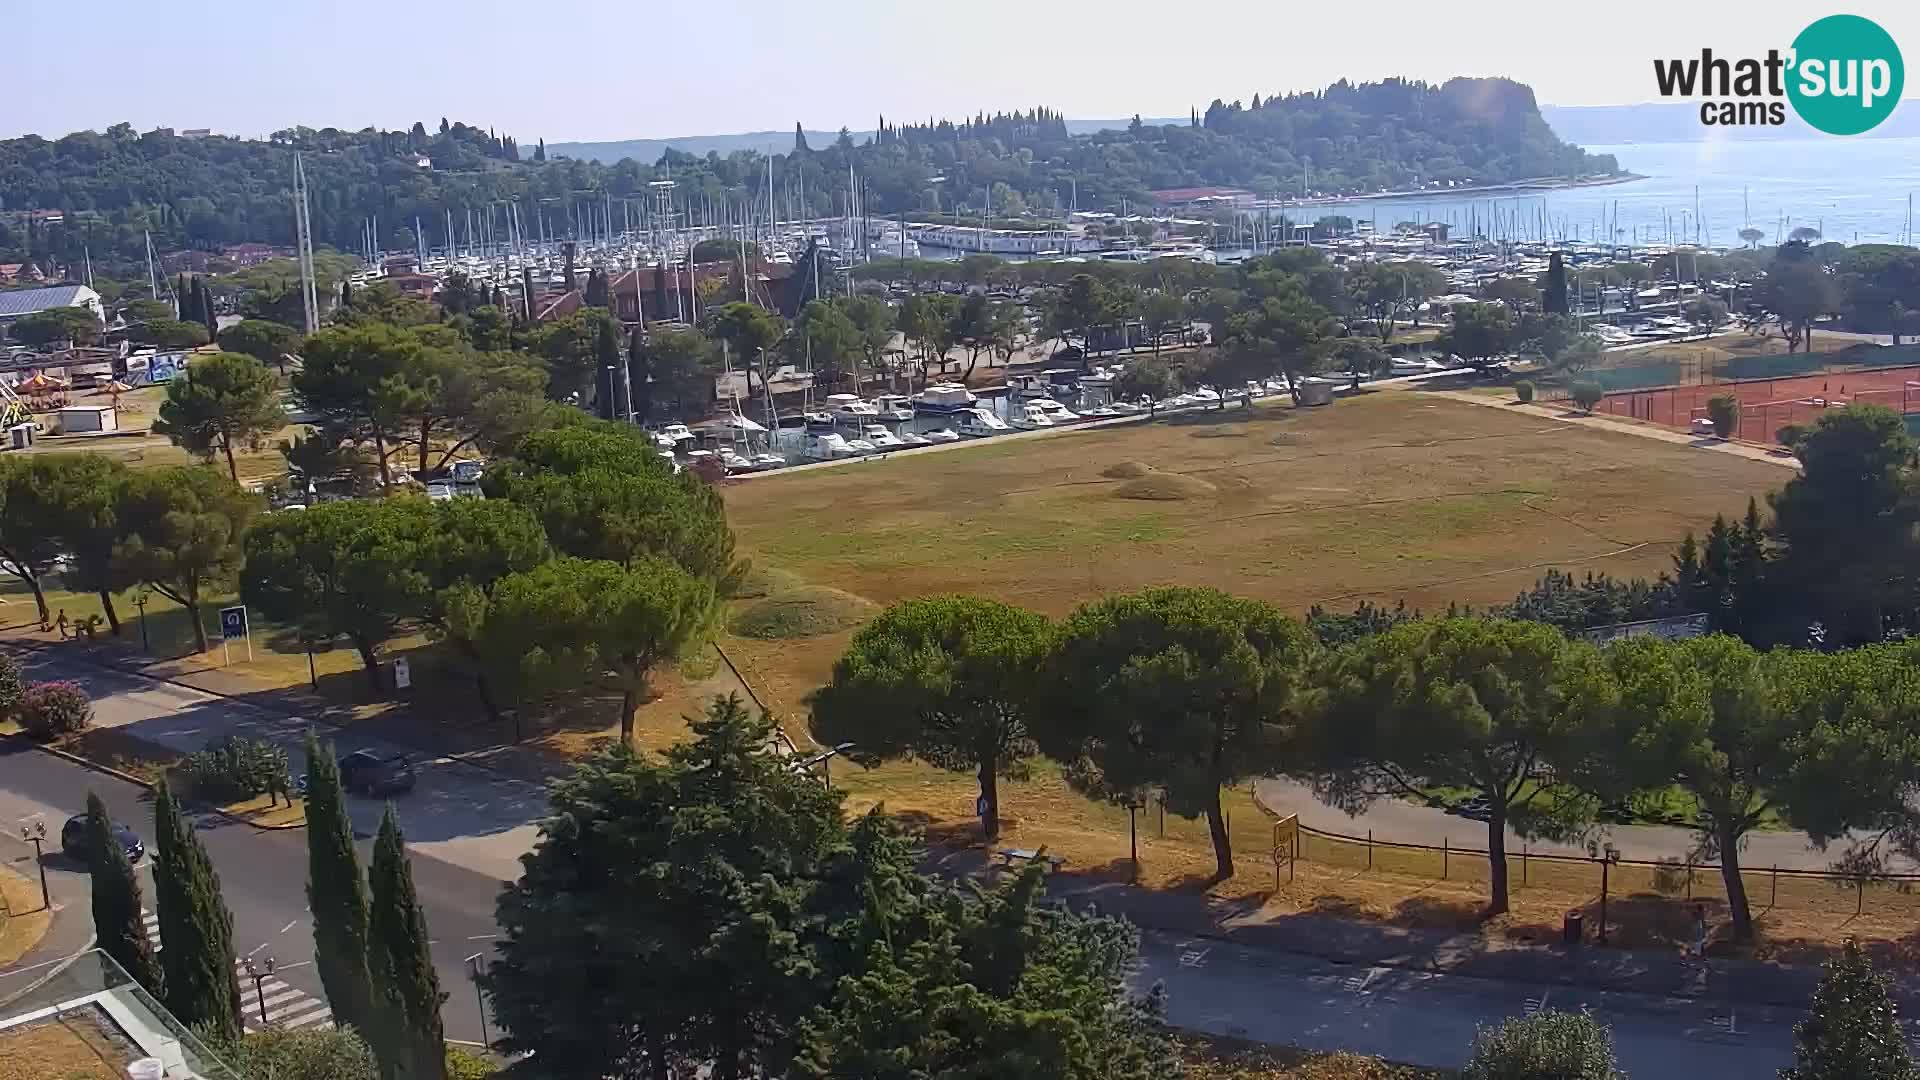 Portorož Live Webcam – view of the marina and tennis courts